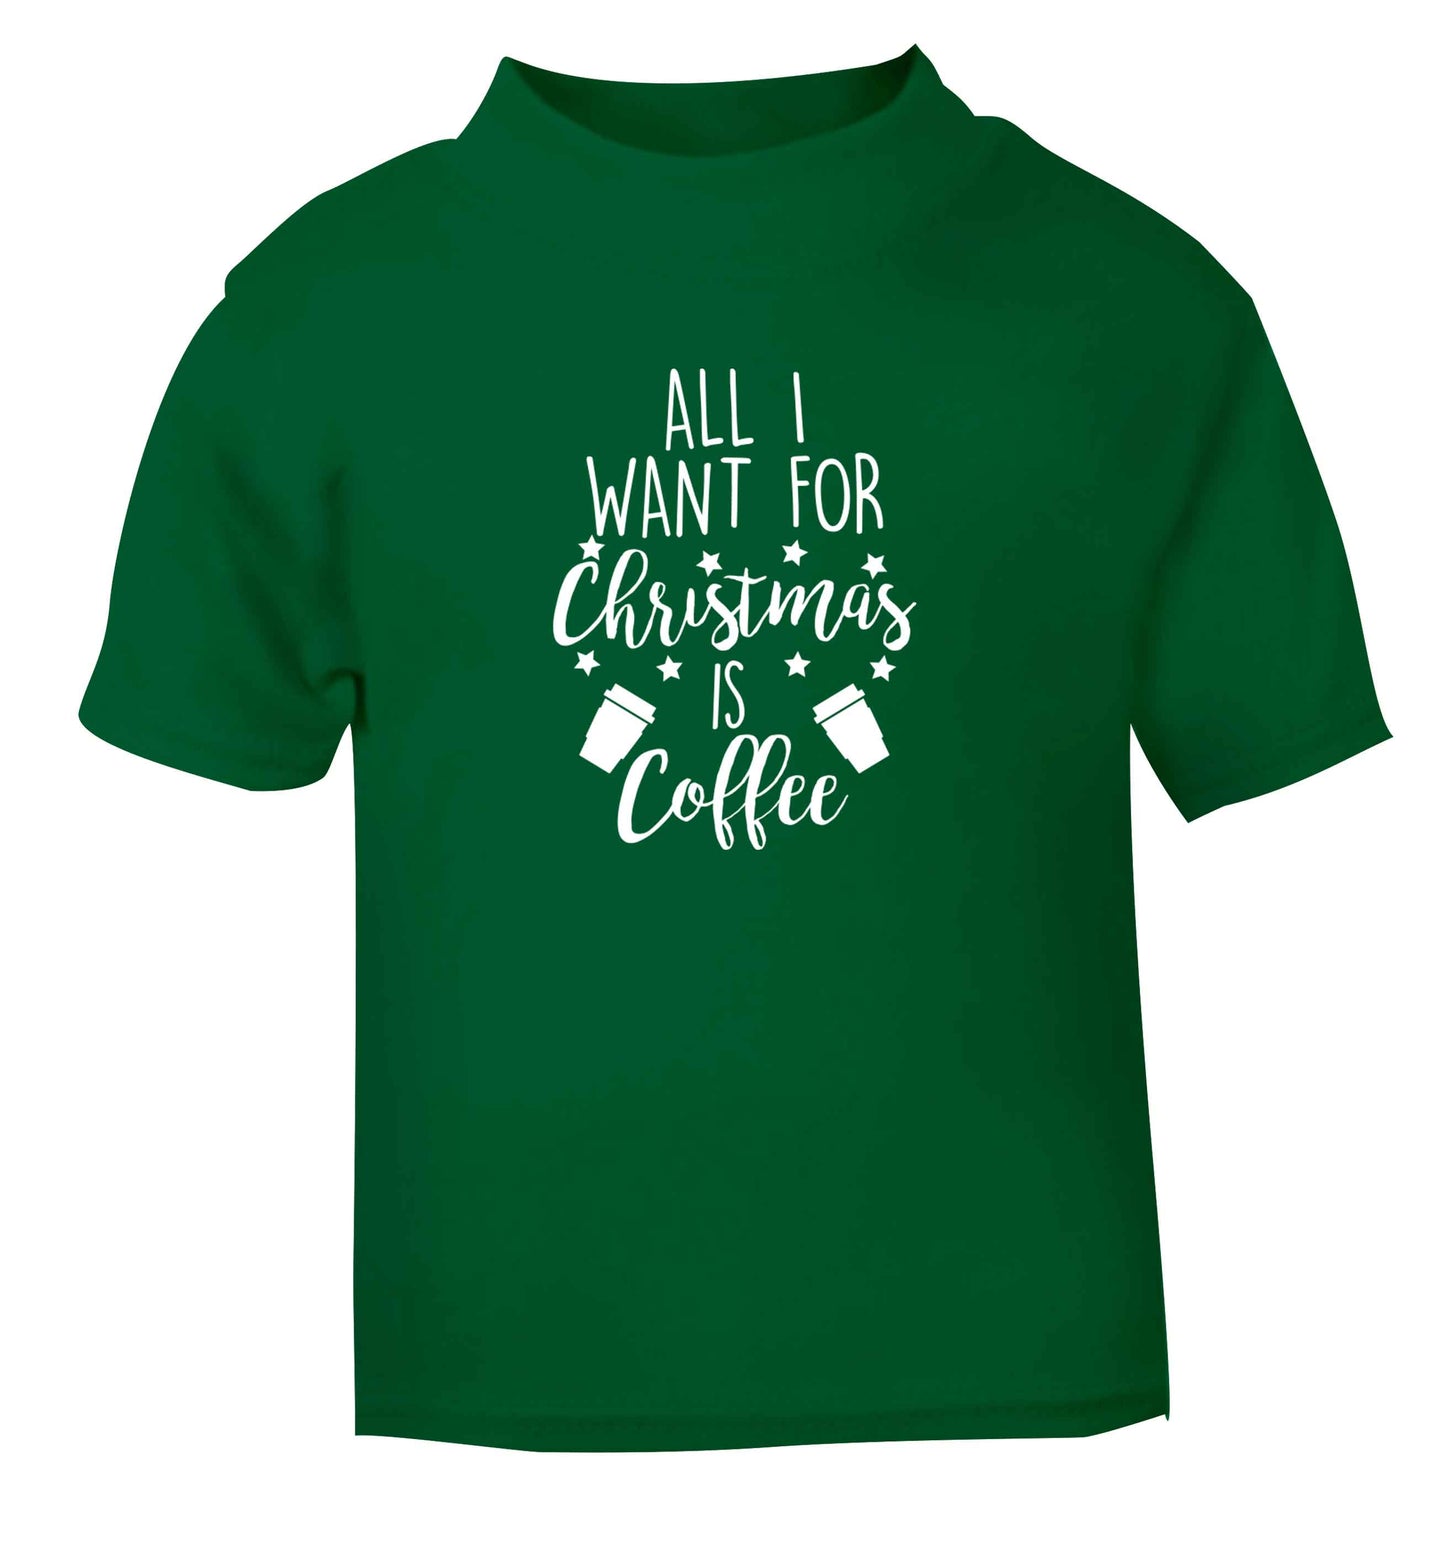 All I want for Christmas is coffee green Baby Toddler Tshirt 2 Years